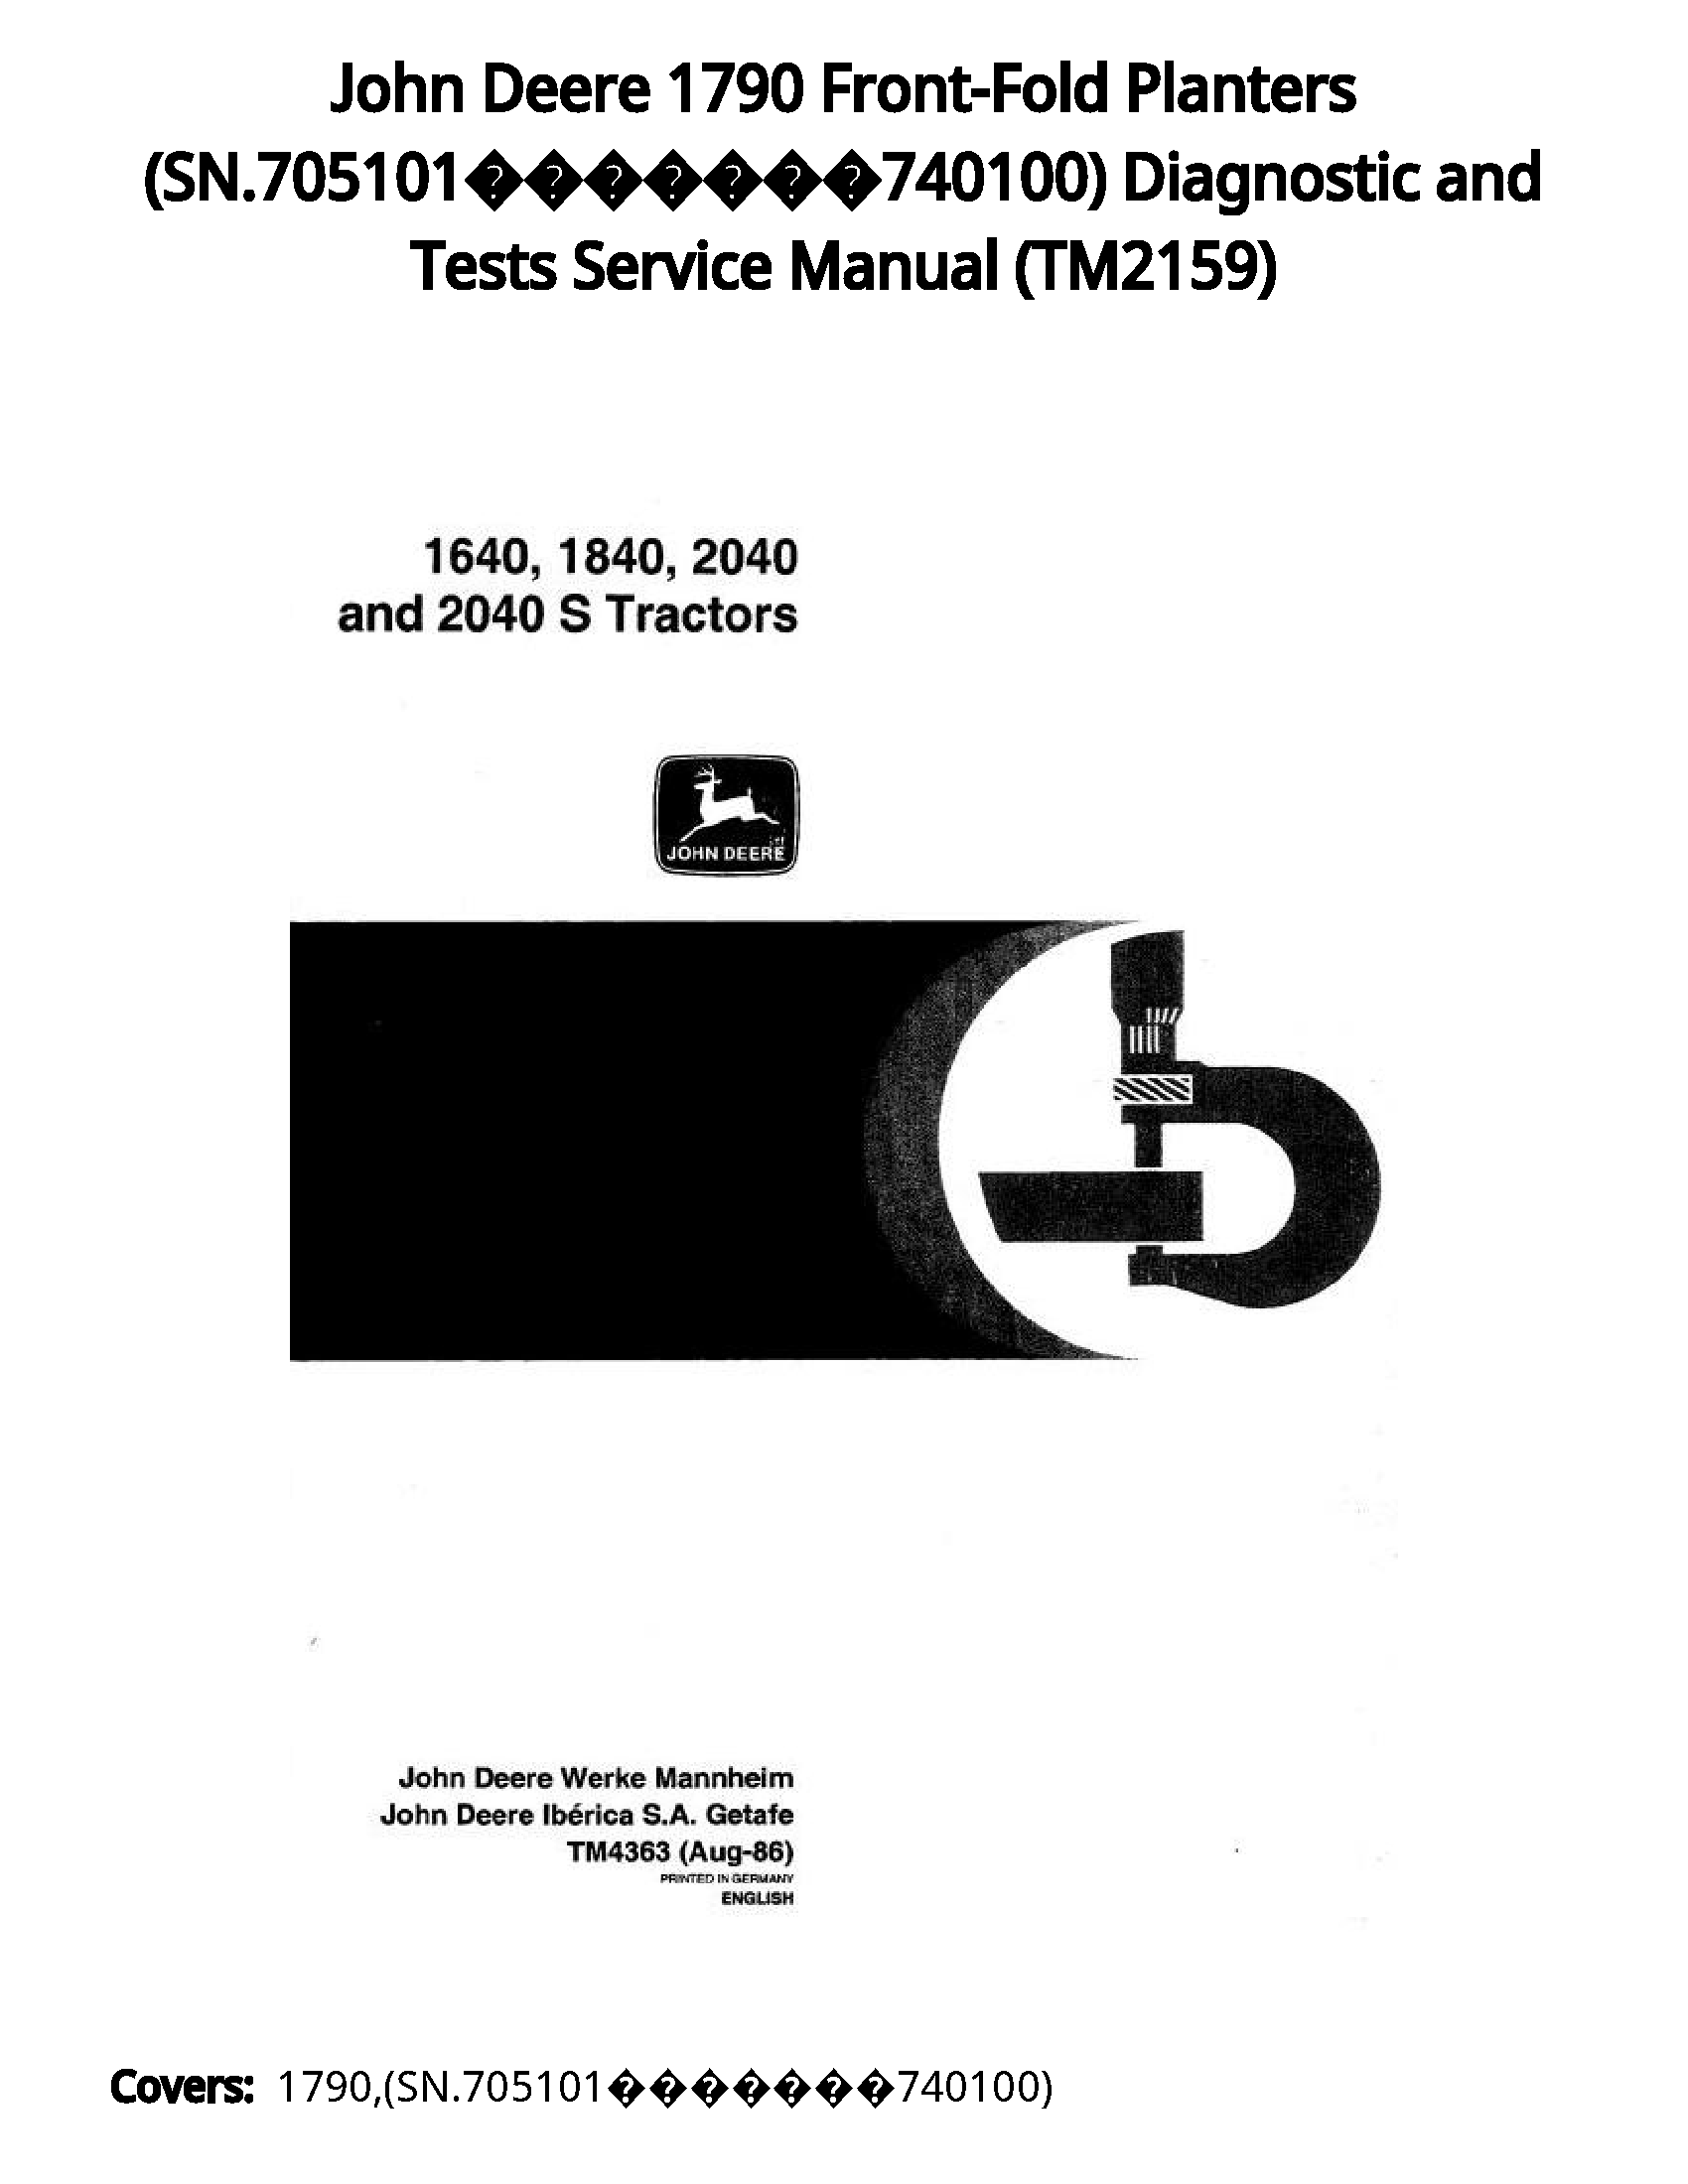 John Deere 1790 Front-Fold Planters (SN.705101???????740100) Diagnostic and Tests Service Manual - TM2159